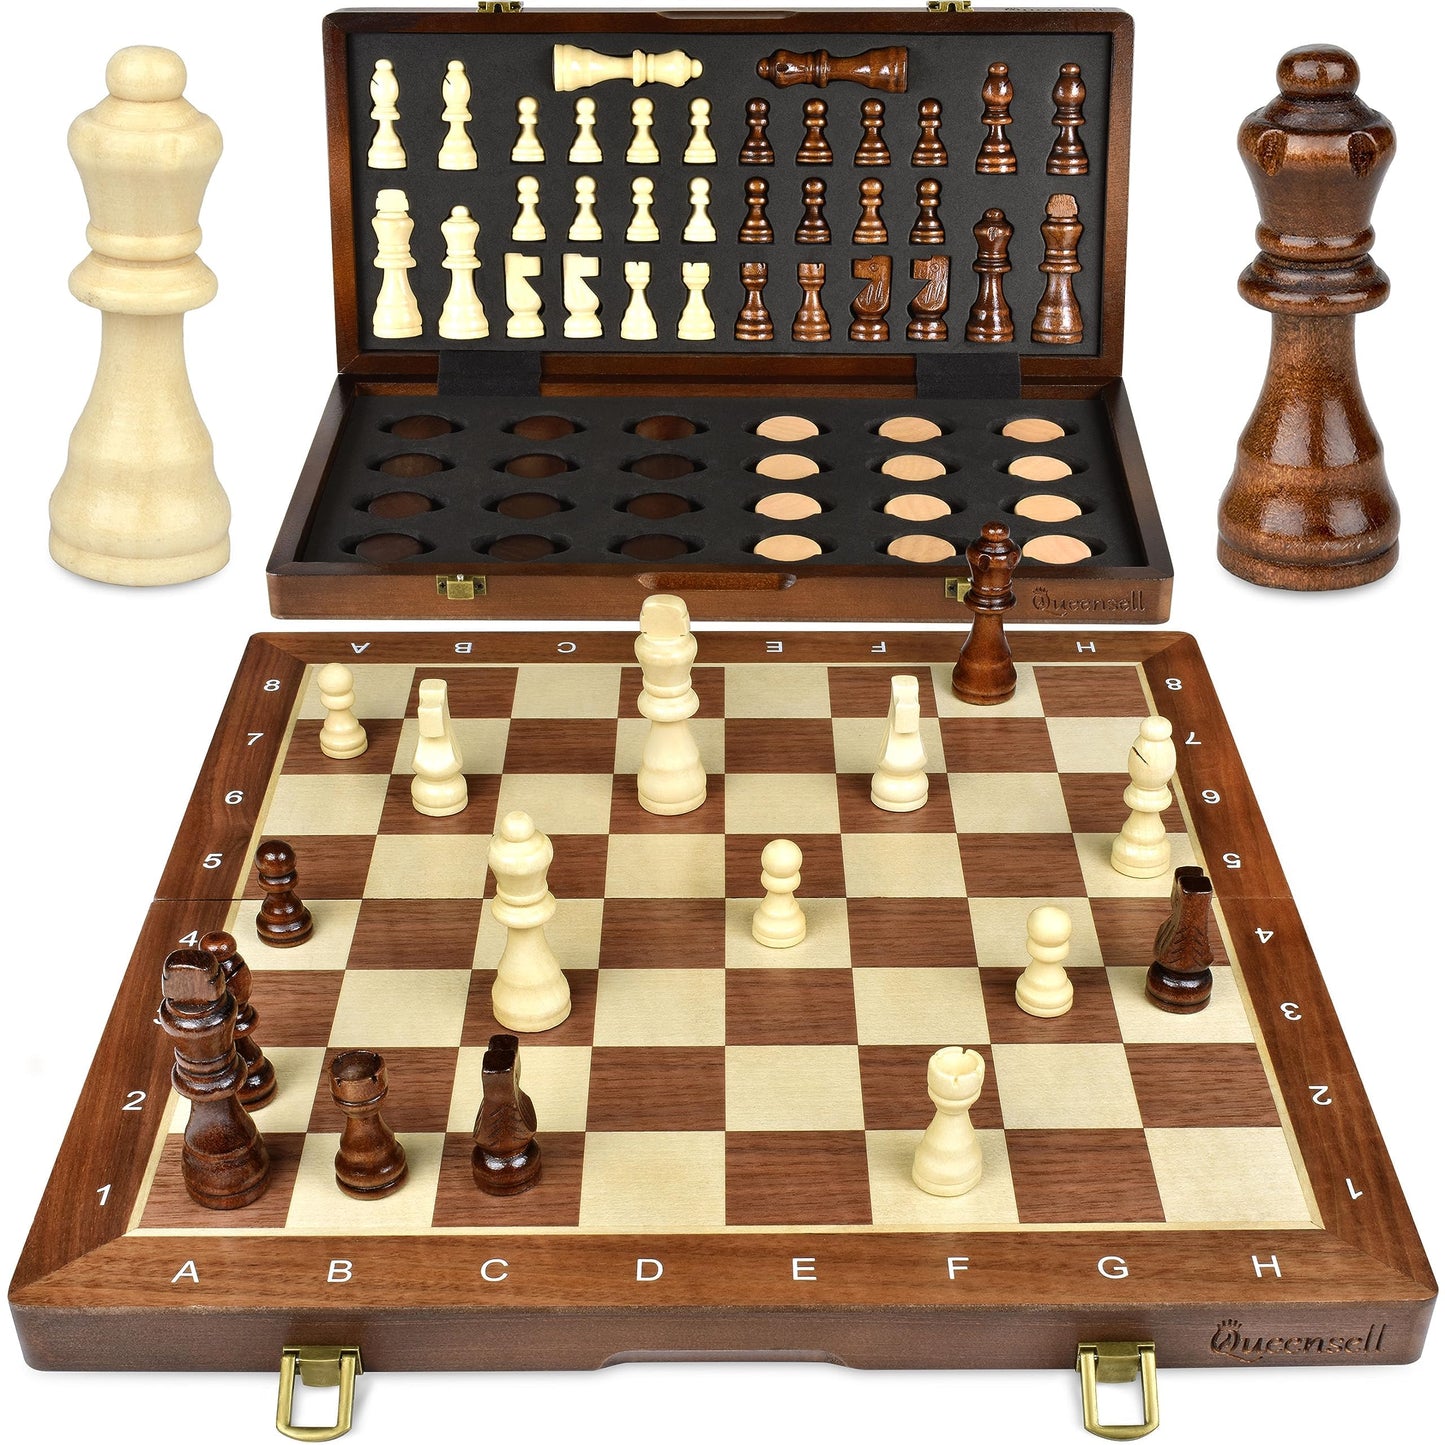 15-Inch Magnetic Chess Set - 2 in 1 Chess and Checkers Board Game for Adults and Kids - Tournament Chessboard with Wooden Pieces